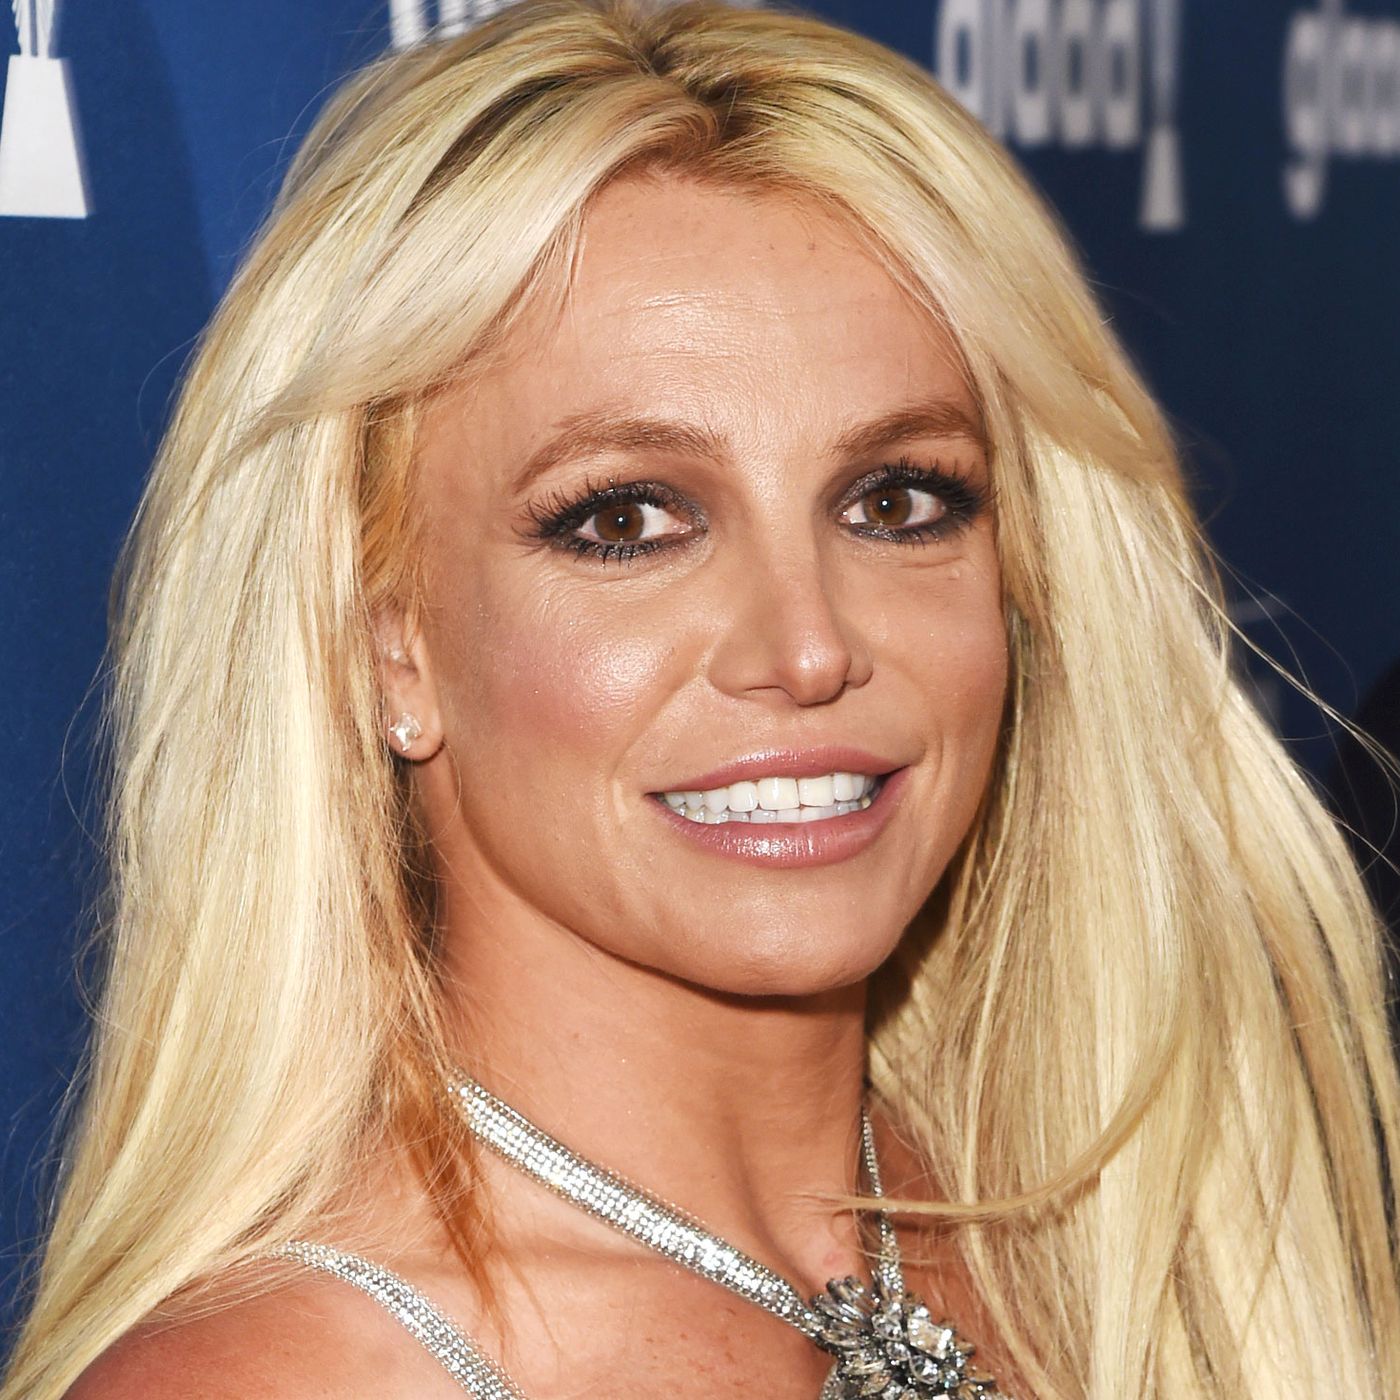 Britney Spears, Sam Asghari Respond to Intervention Reports